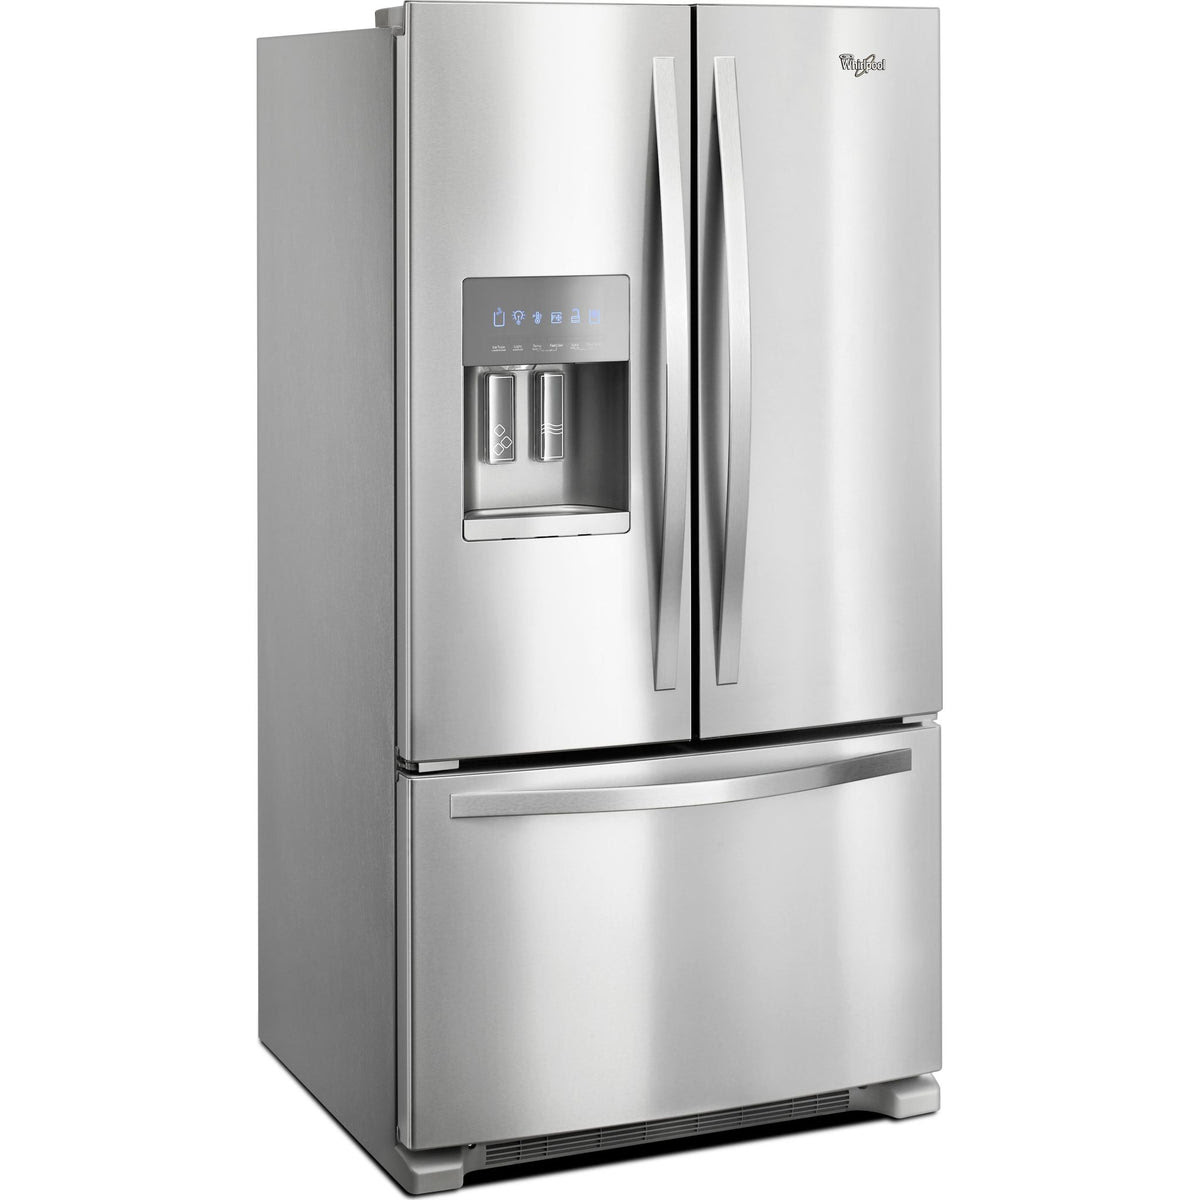 It can also stream music and. Whirlpool French Door Fridge Wrf555sdfz Stainless Steel Ashley Homestore Canada